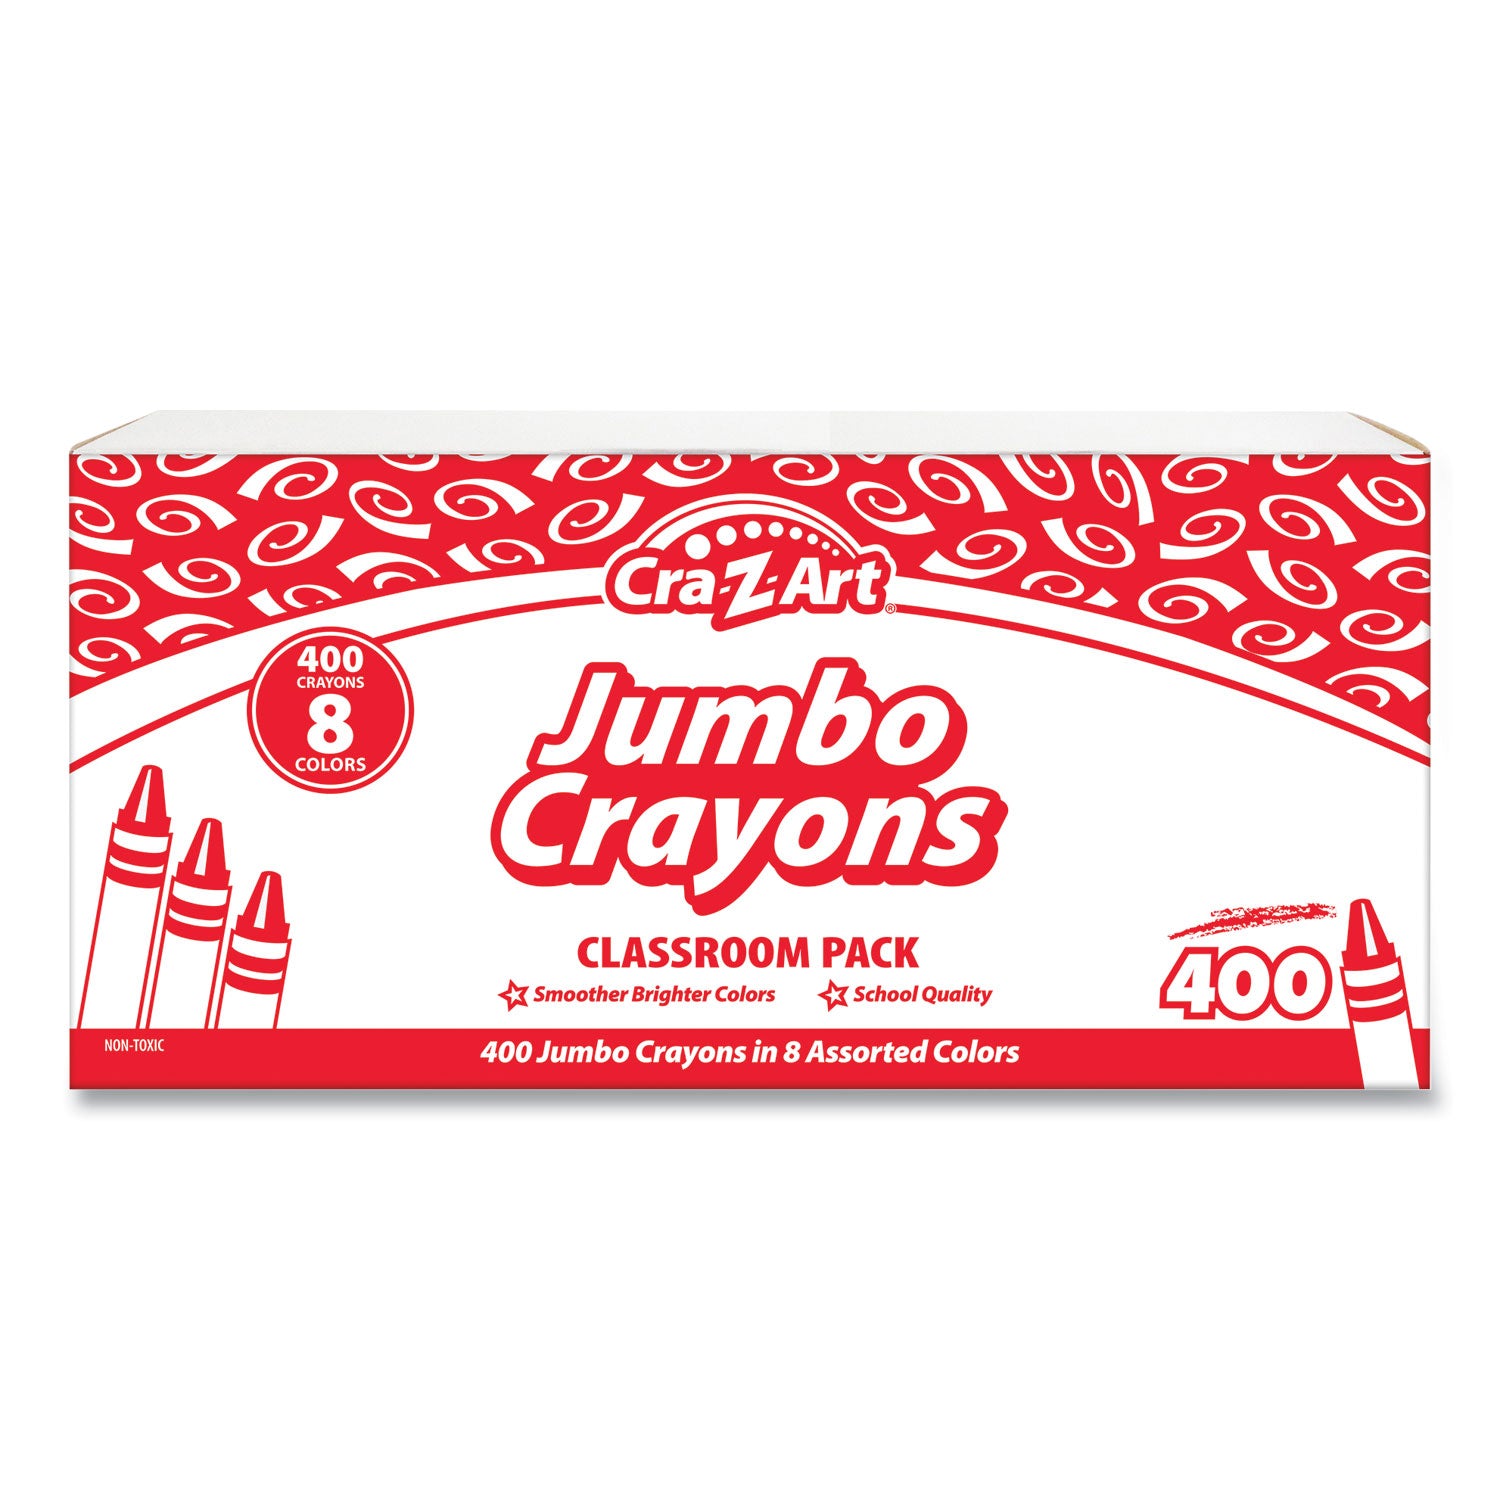 jumbo-crayons-8-assorted-colors-400-pack_cza740051 - 1